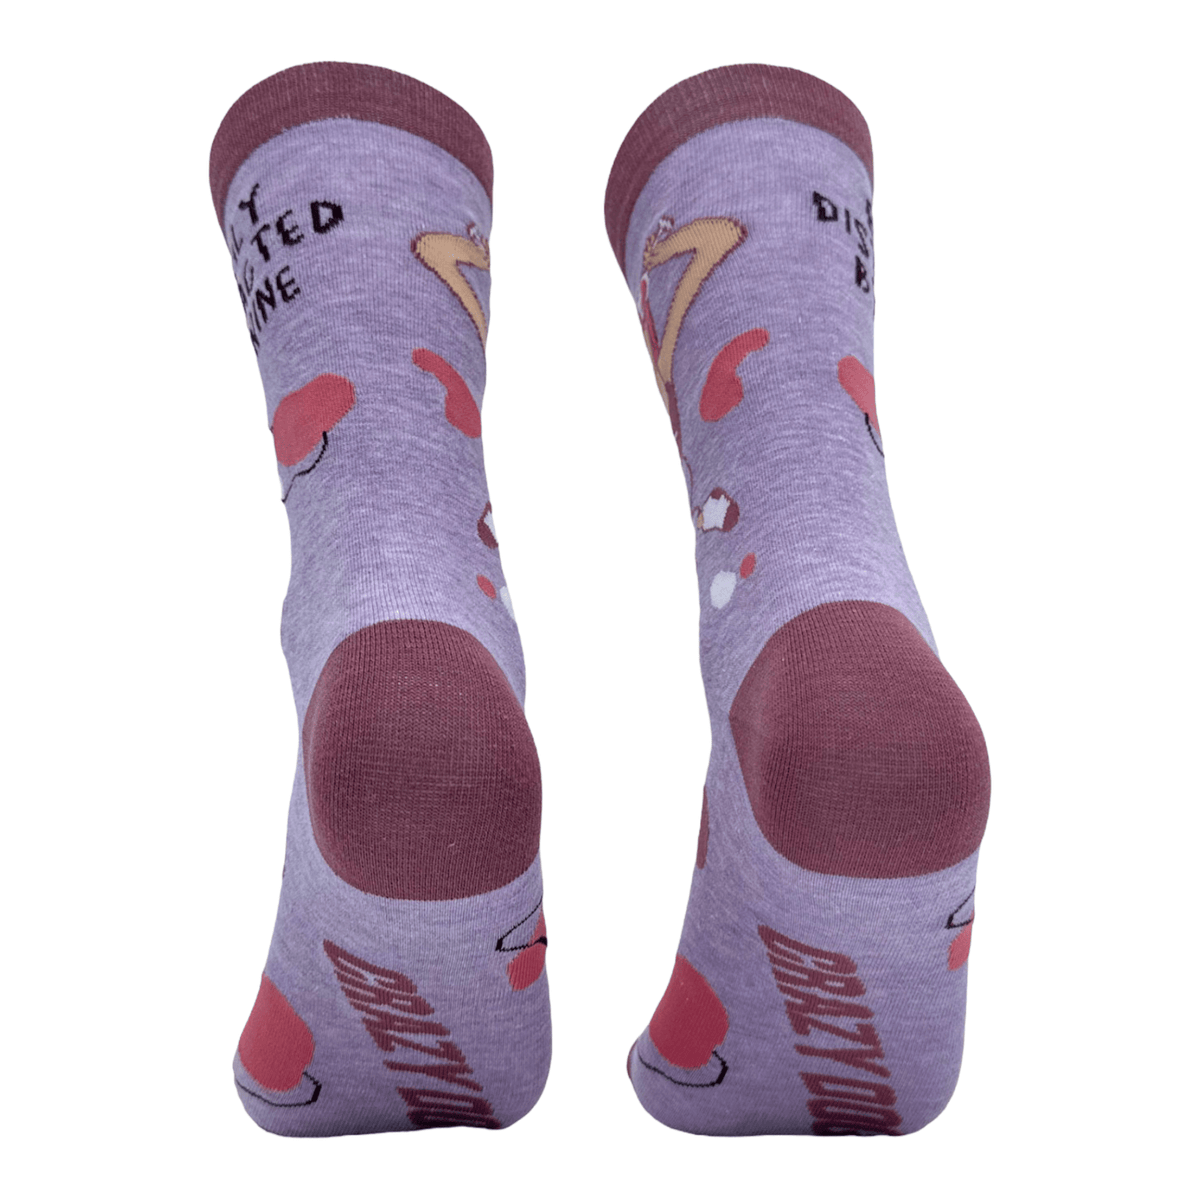 Women&#39;s Easily Distracted By Wine Socks  -  Crazy Dog T-Shirts